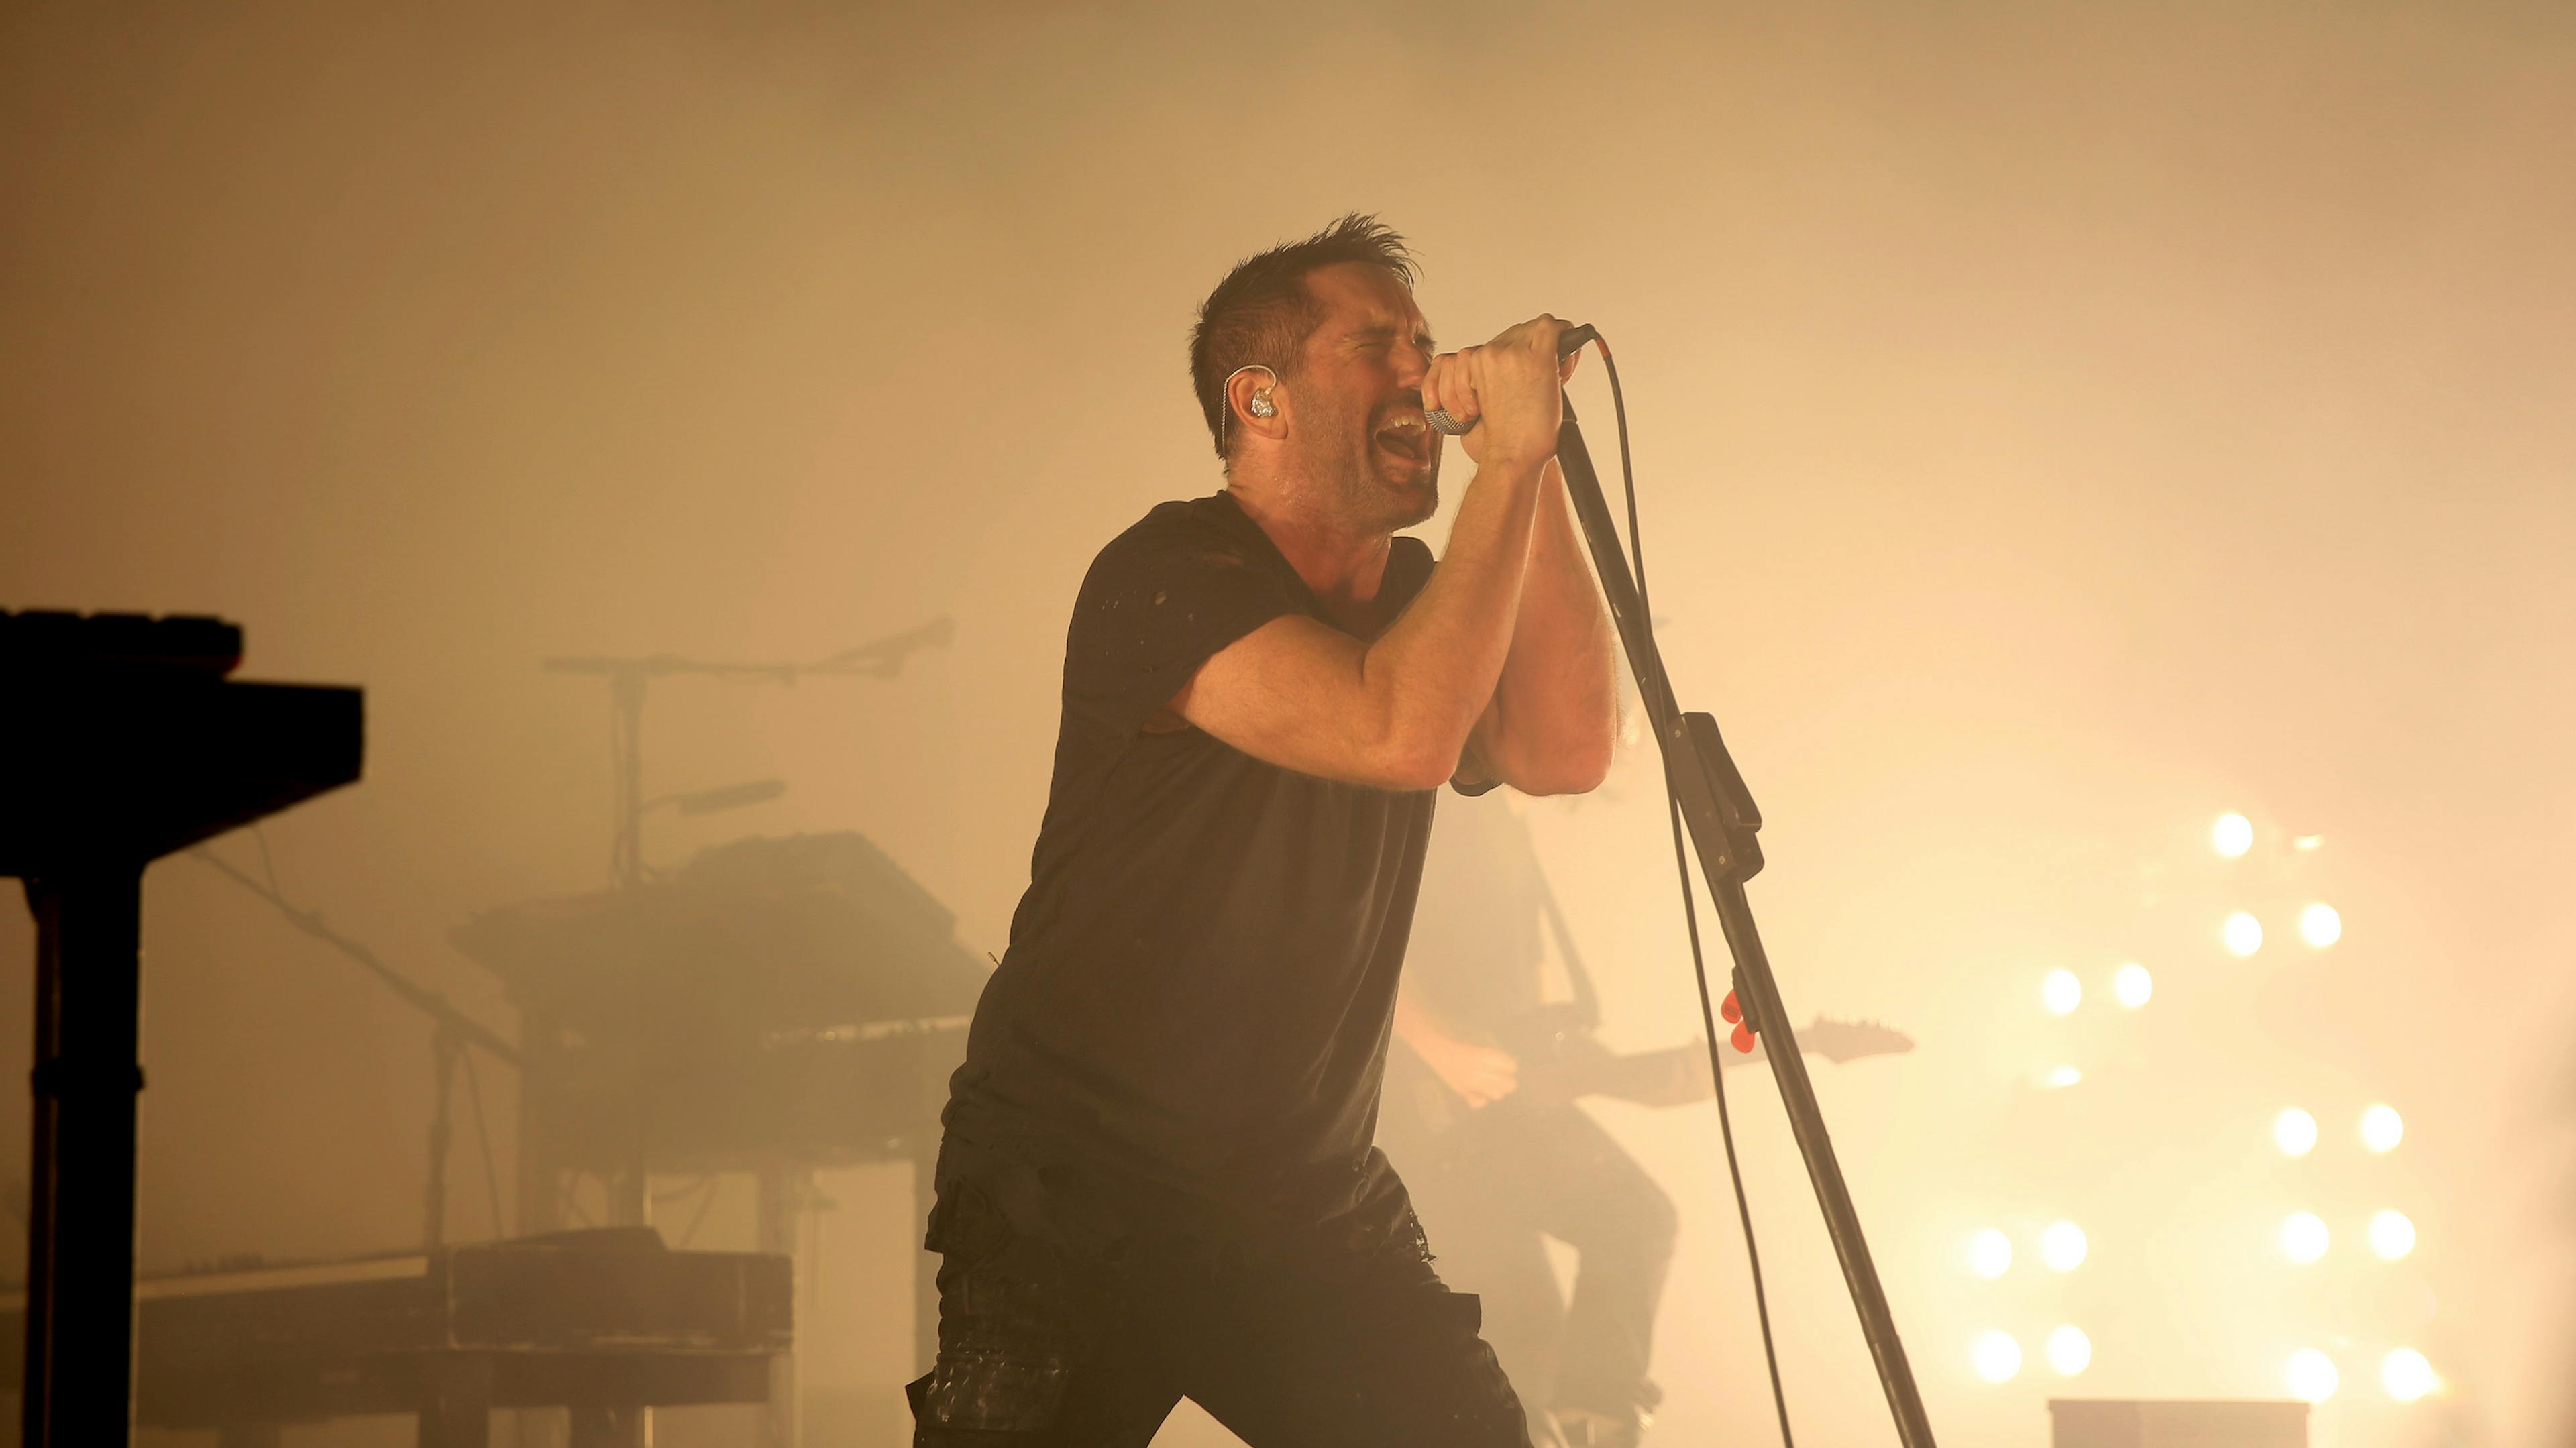 Gallery: Nine Inch Nails At Kings Theatre In Brooklyn, New York